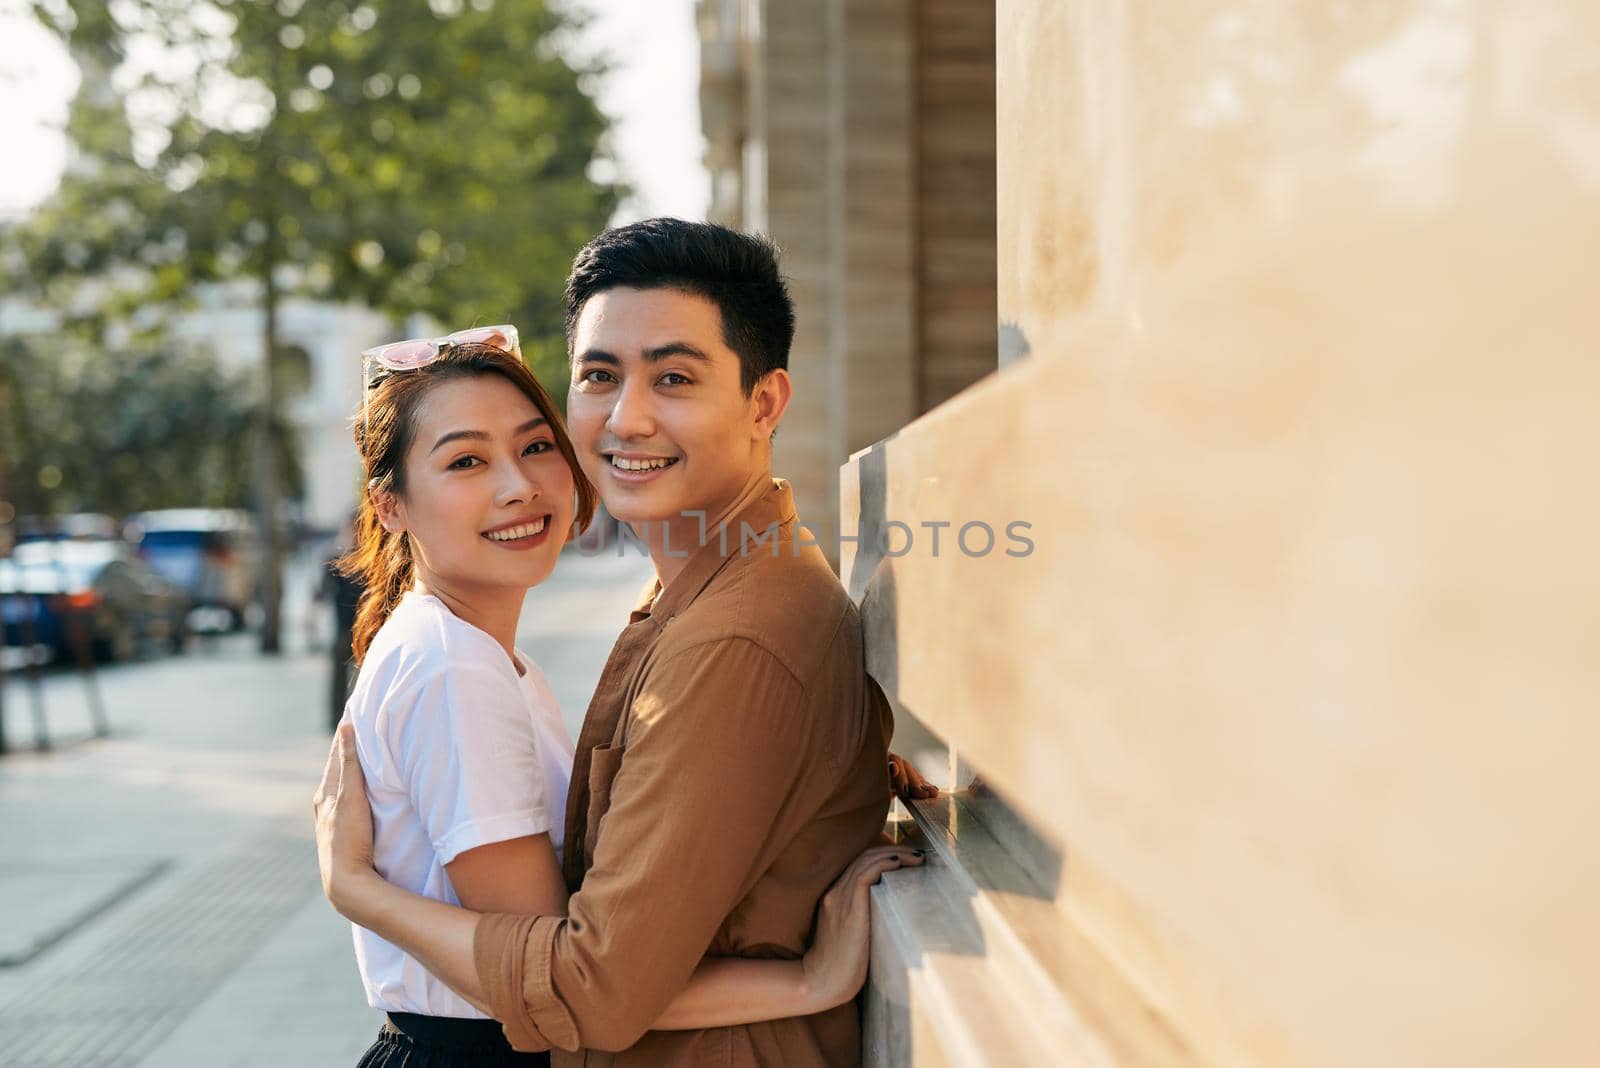 Rear view of a young couple hugging in a destination city while standing in the shopping district near a luxury quality shoe store, outdoors